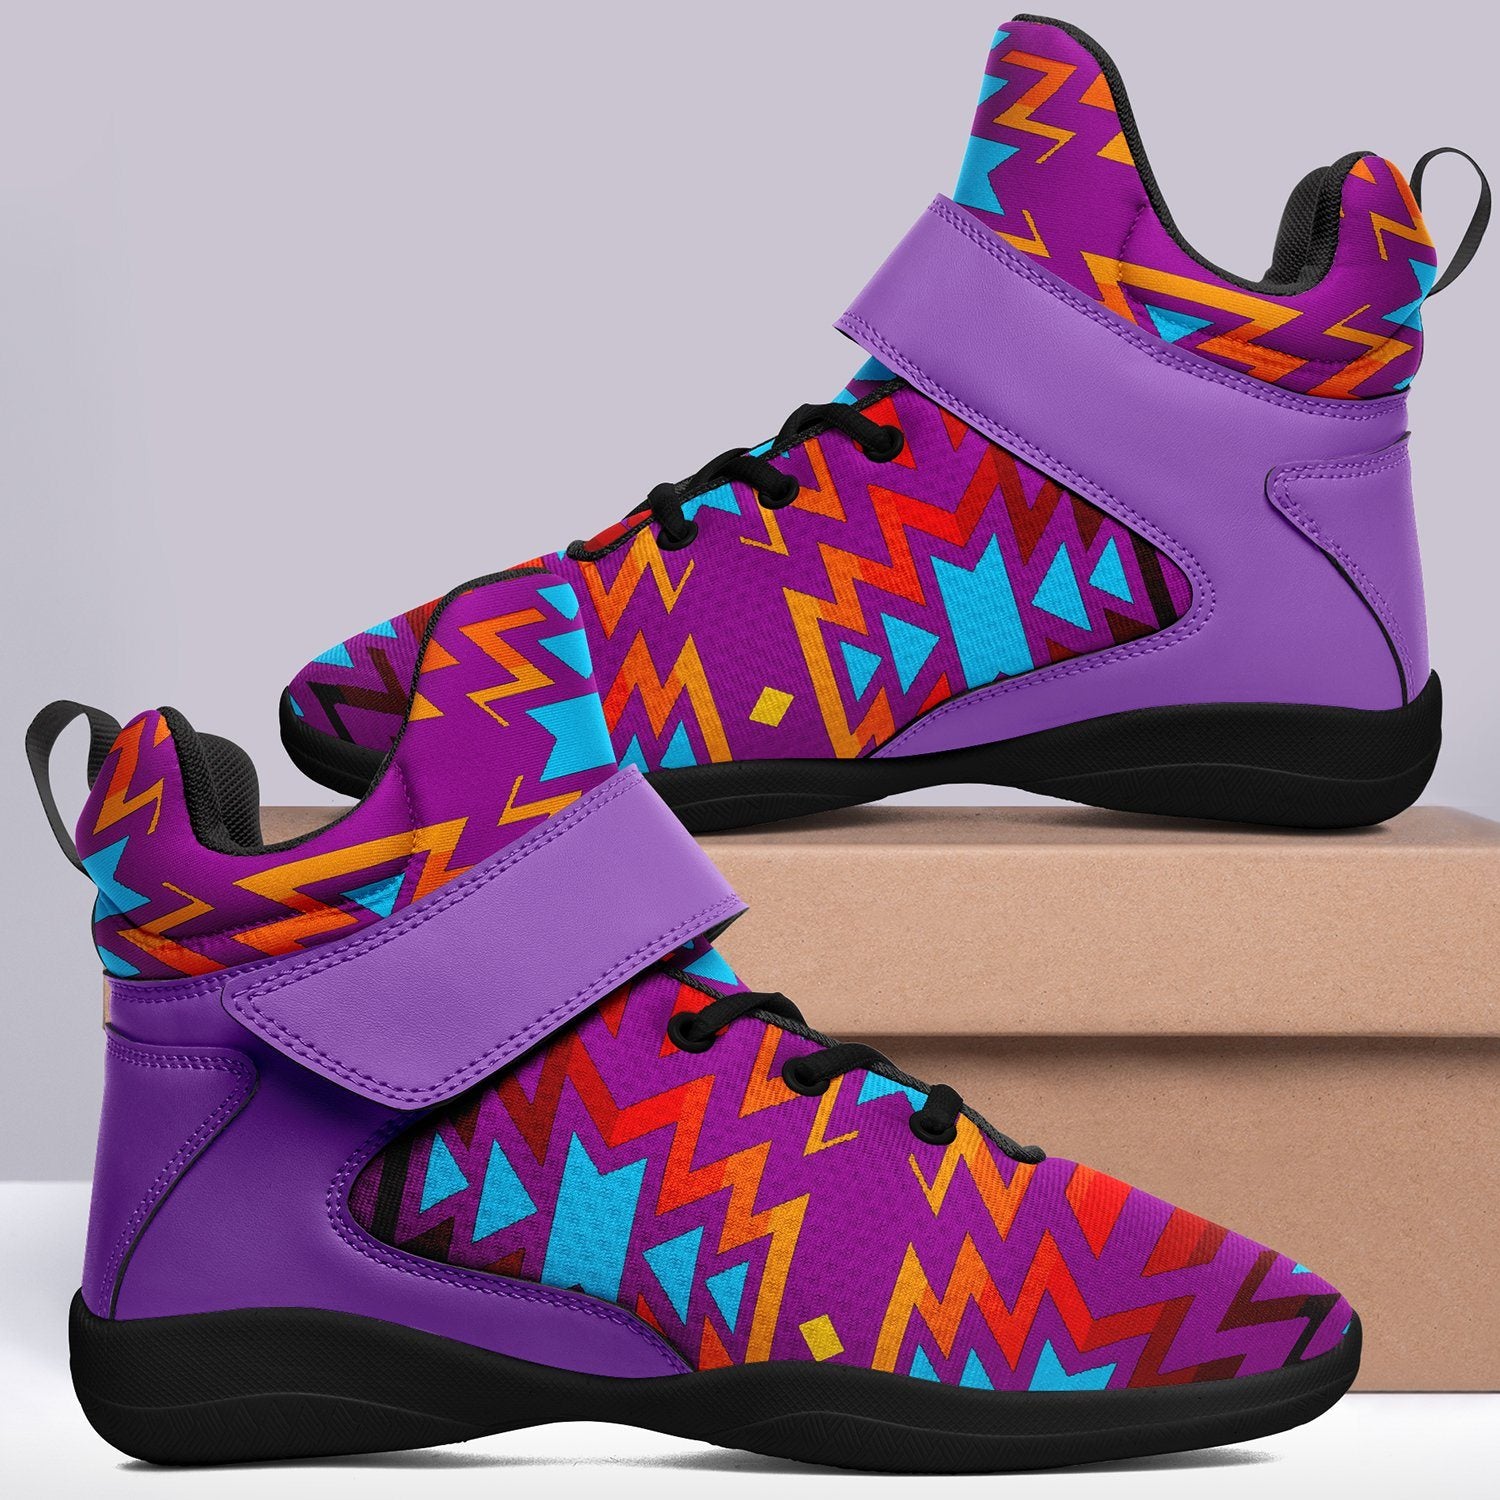 Fire Colors and Turquoise Purple Ipottaa Basketball / Sport High Top Shoes 49 Dzine 